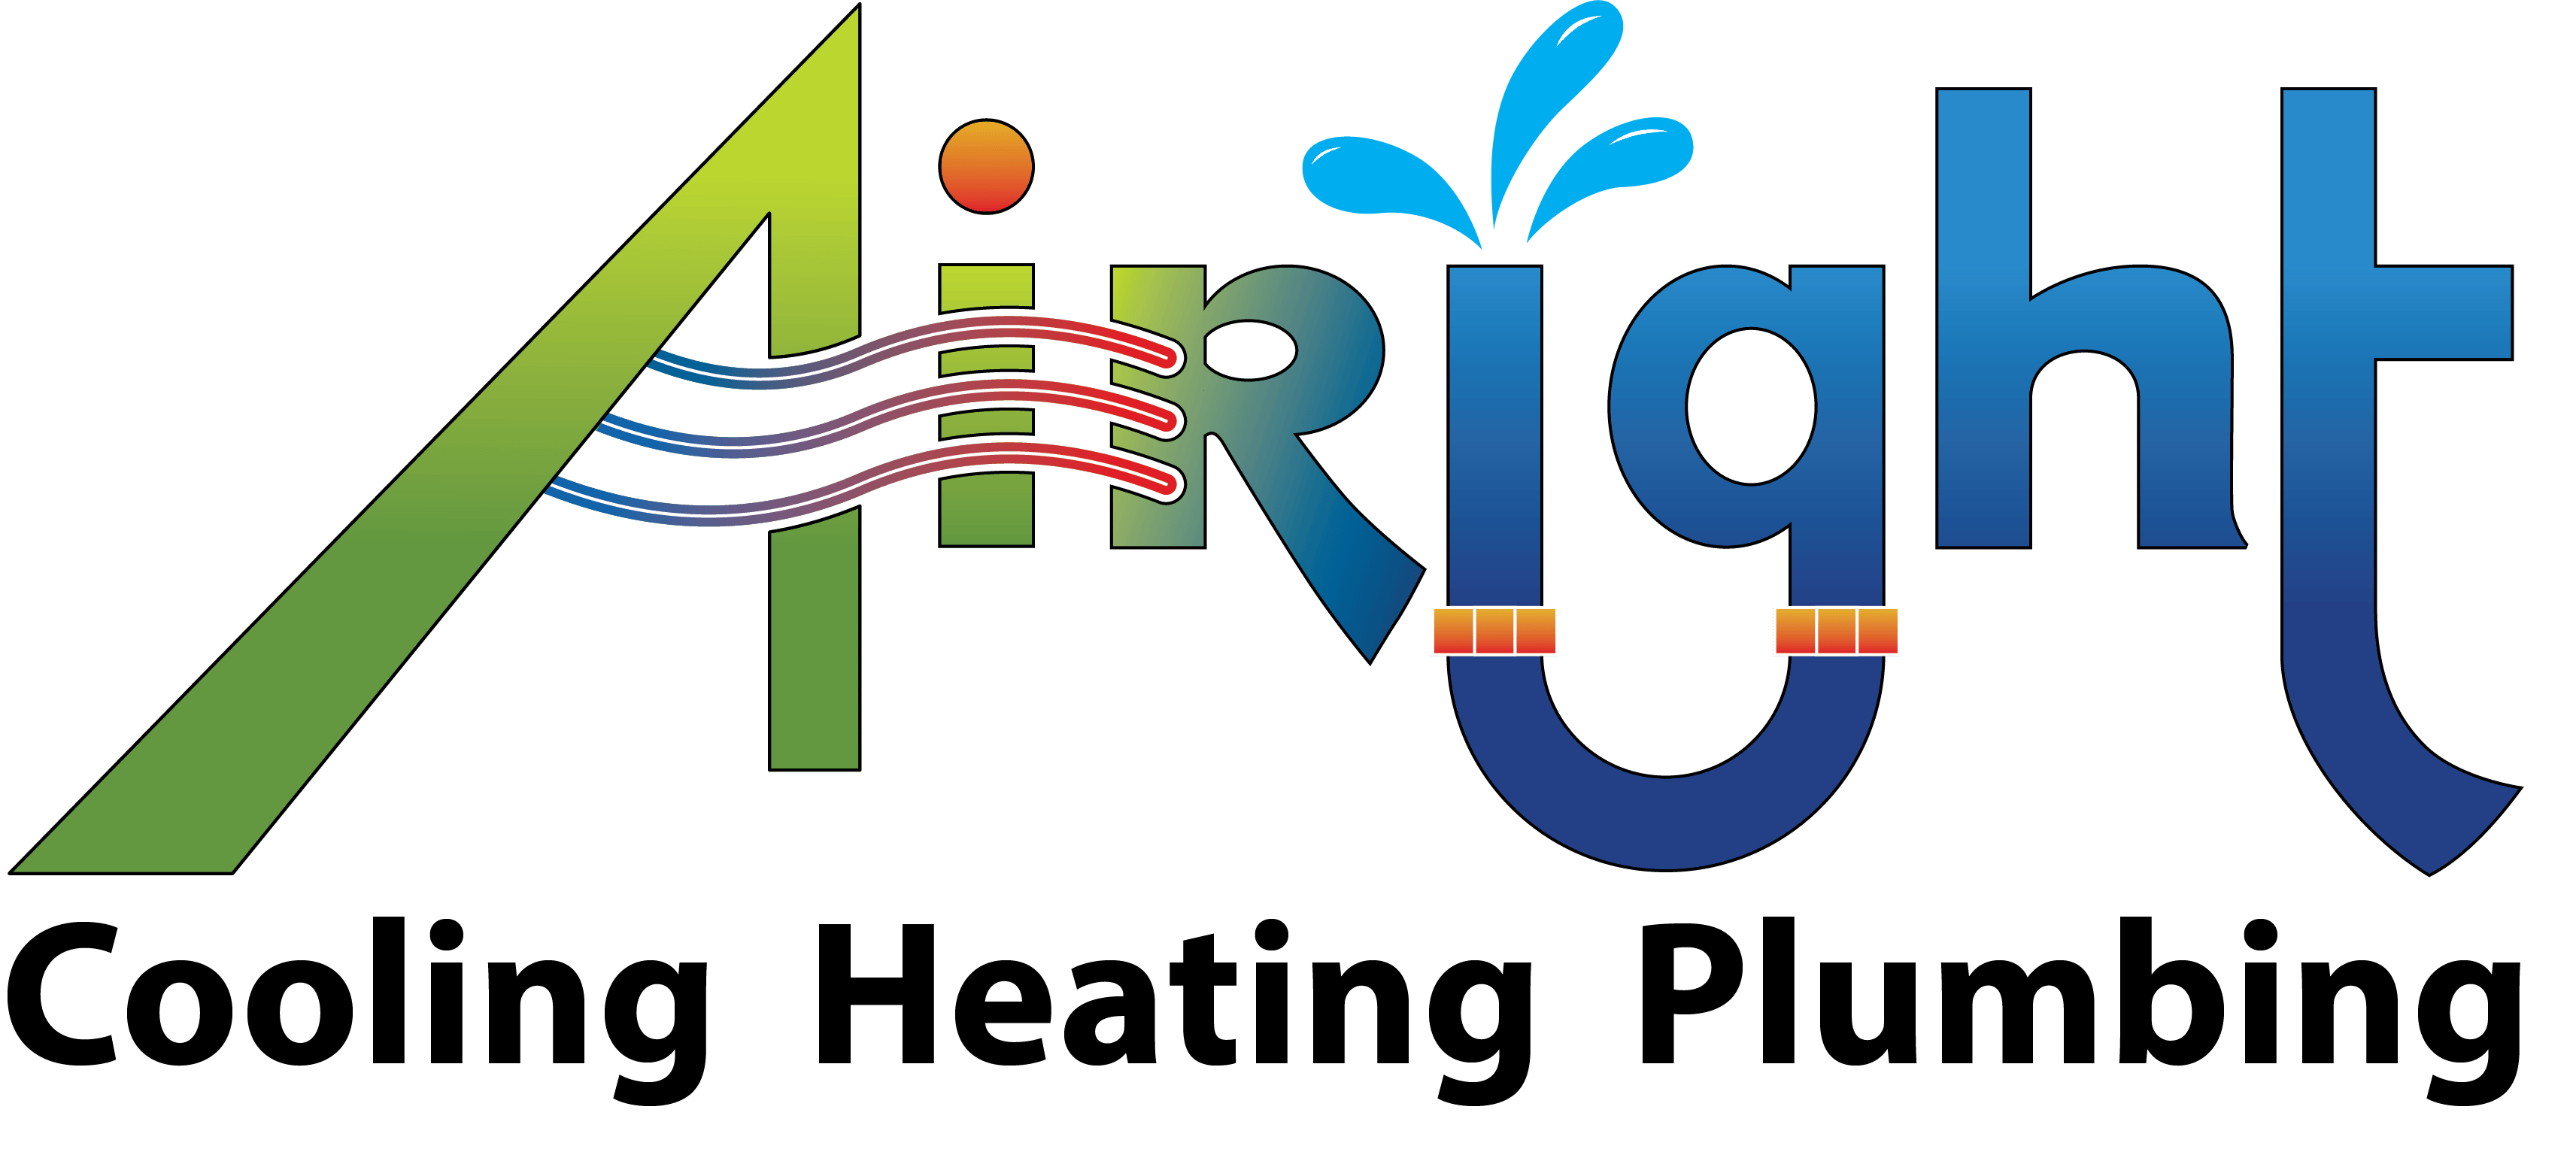 Airight Cooling, Heating & Plumbing inc